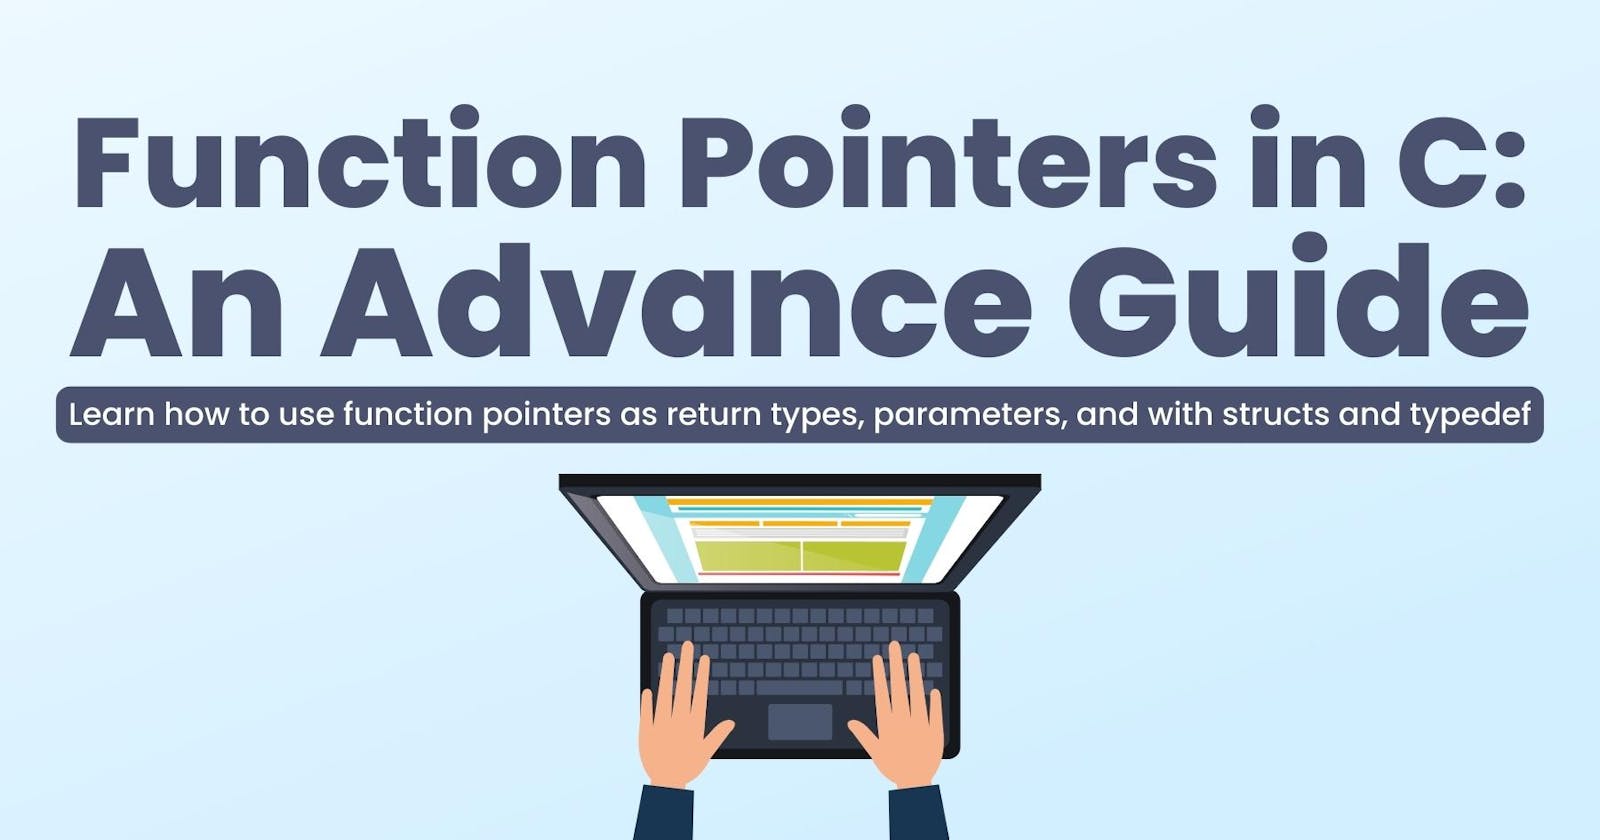 Advanced Function Pointer Concepts in C: A Guide for Programmers